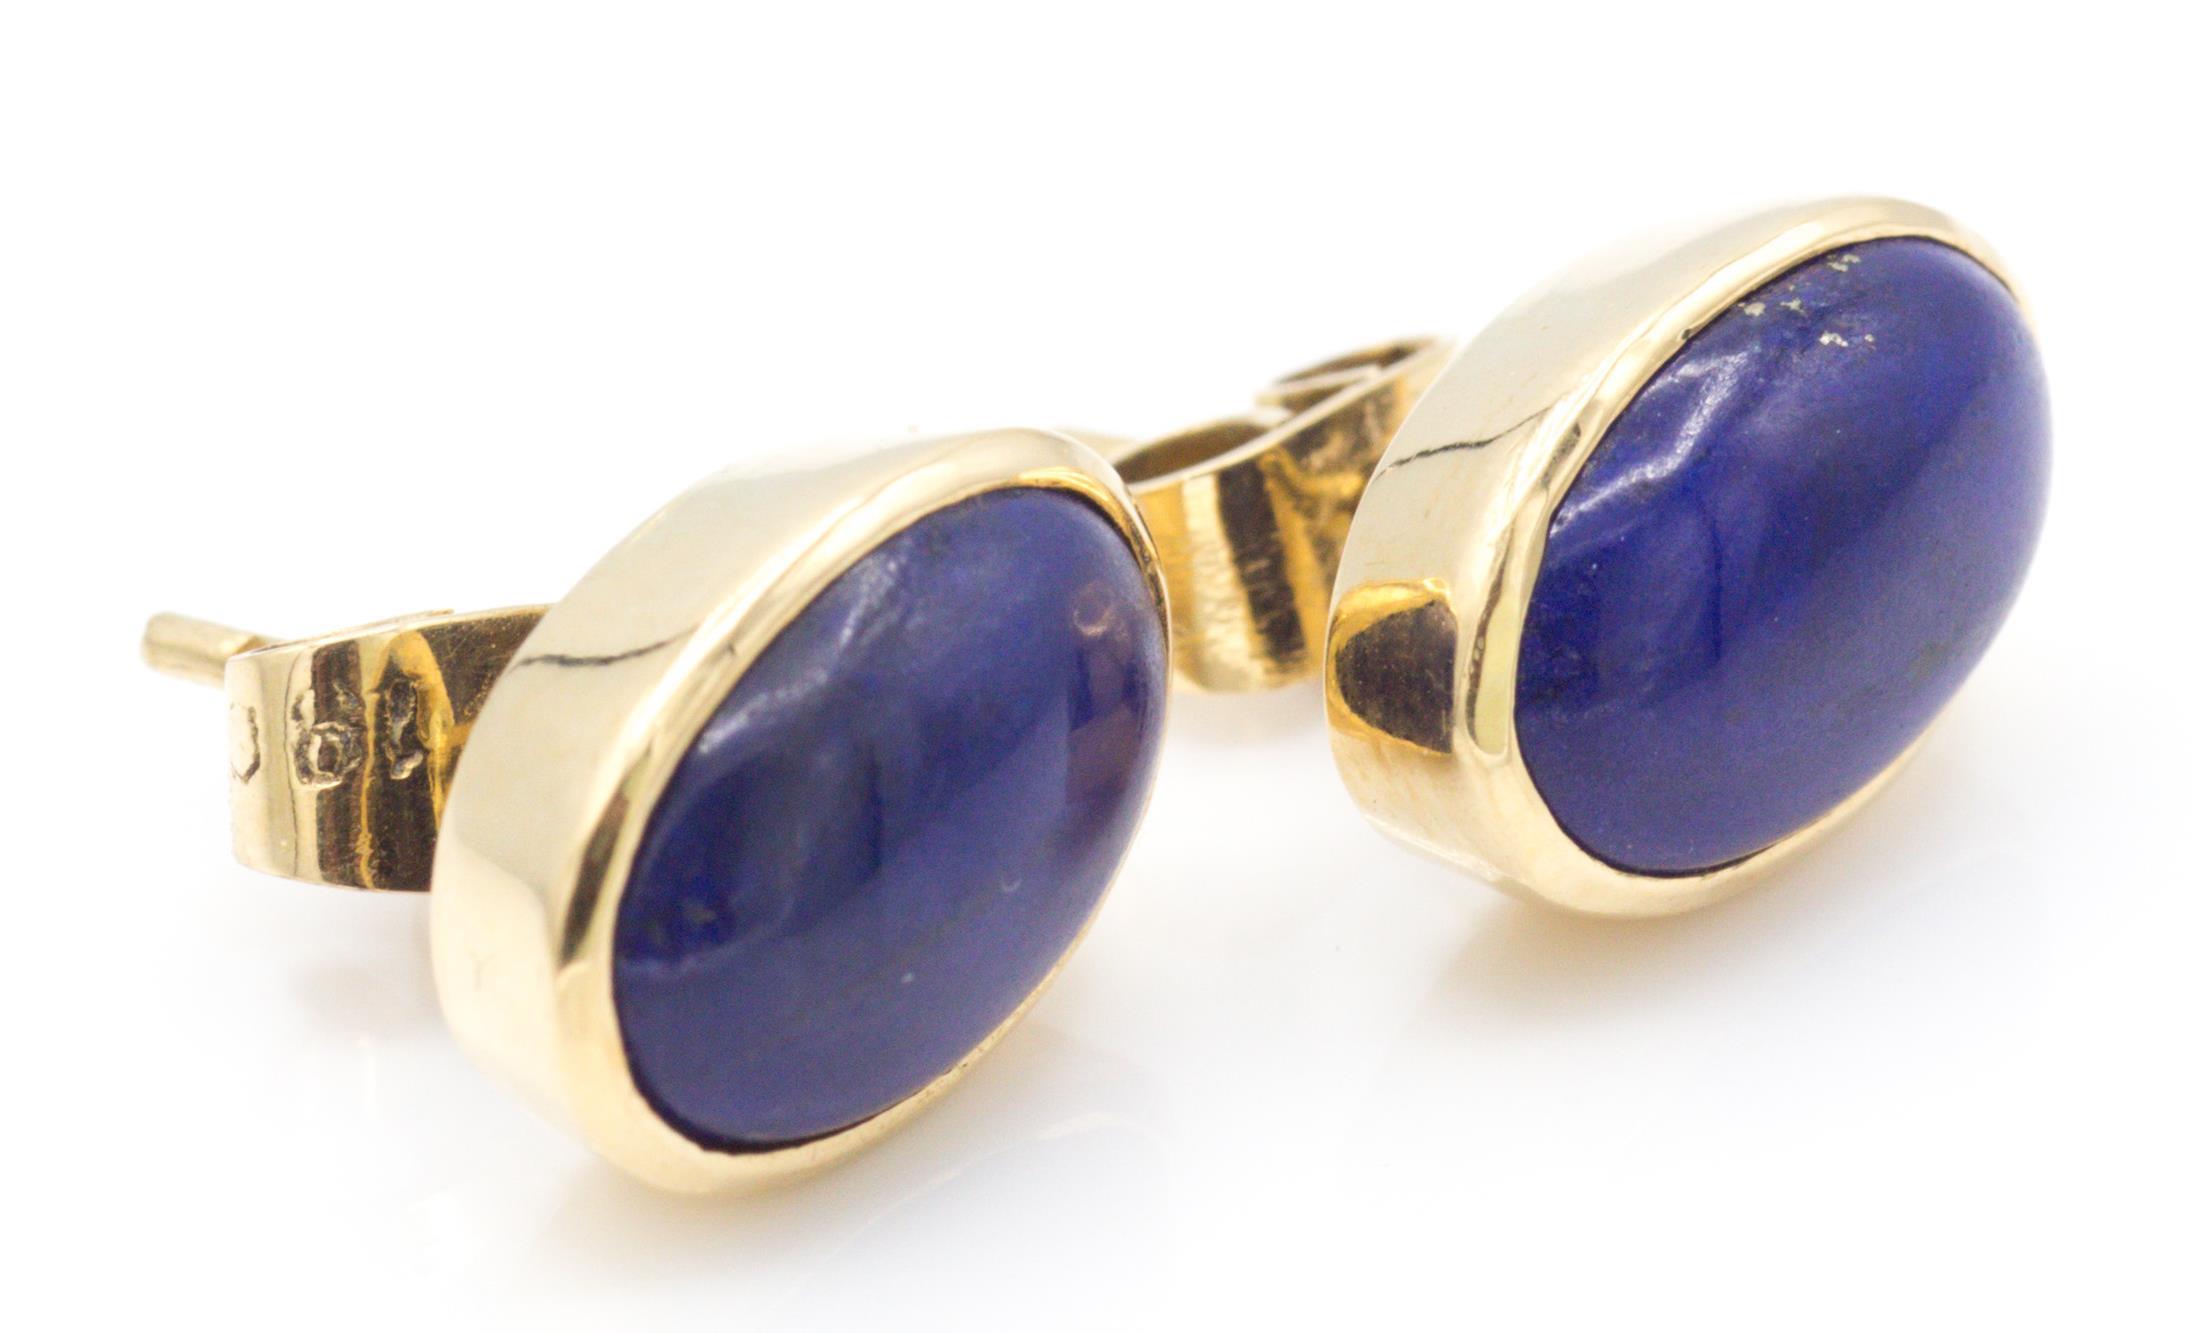 A Pair of Gold & Lapis Lazuli Earrings - Image 2 of 3